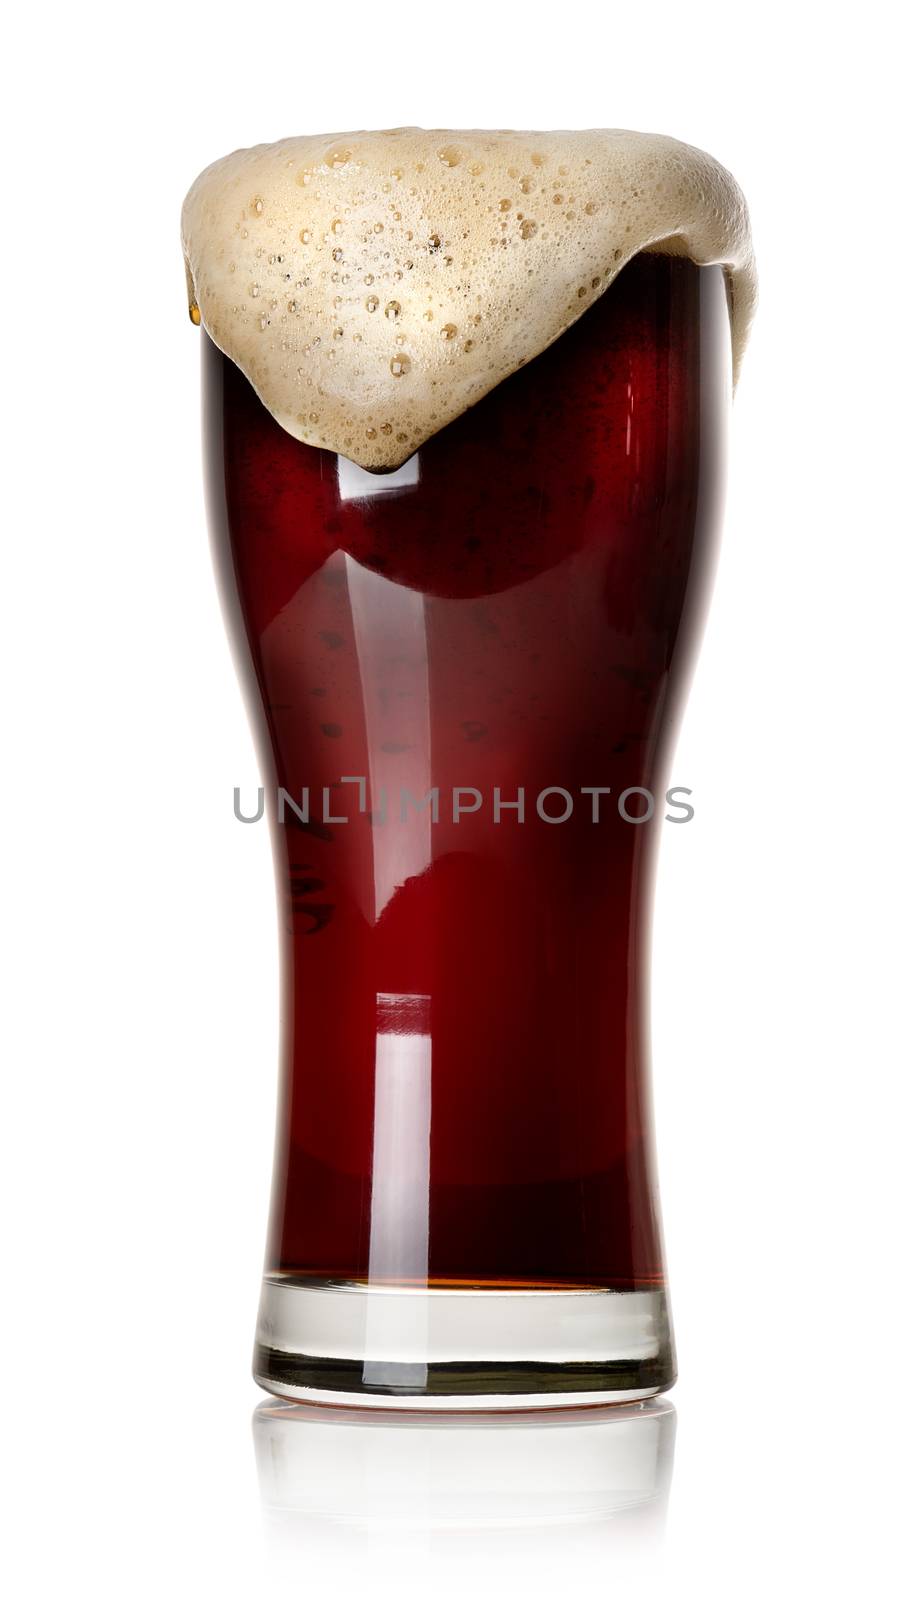 Froth on black beer by Givaga